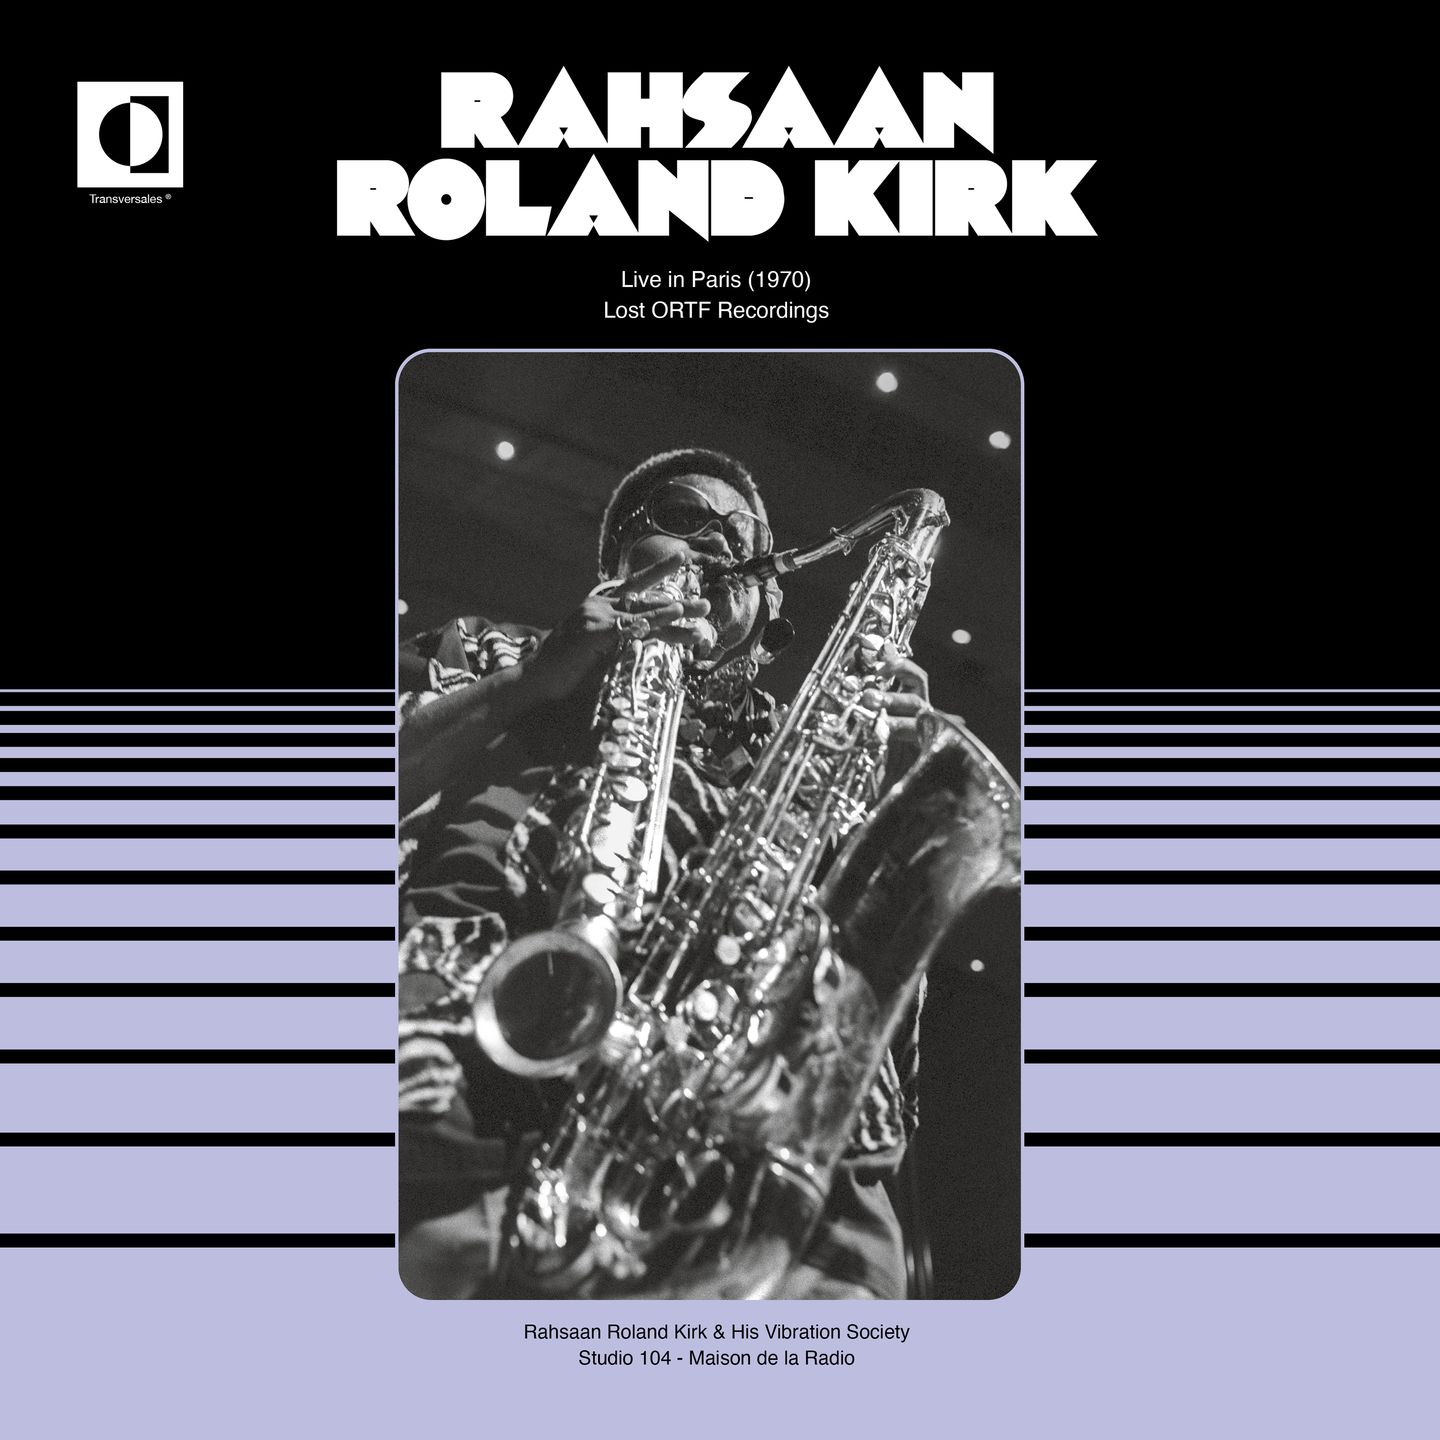 RAHSAAN ROLAND KIRK & THE VIBRATION SOCIETY – LIVE IN PARIS (1970) (LOST ORTF RECORDINGS) – LP